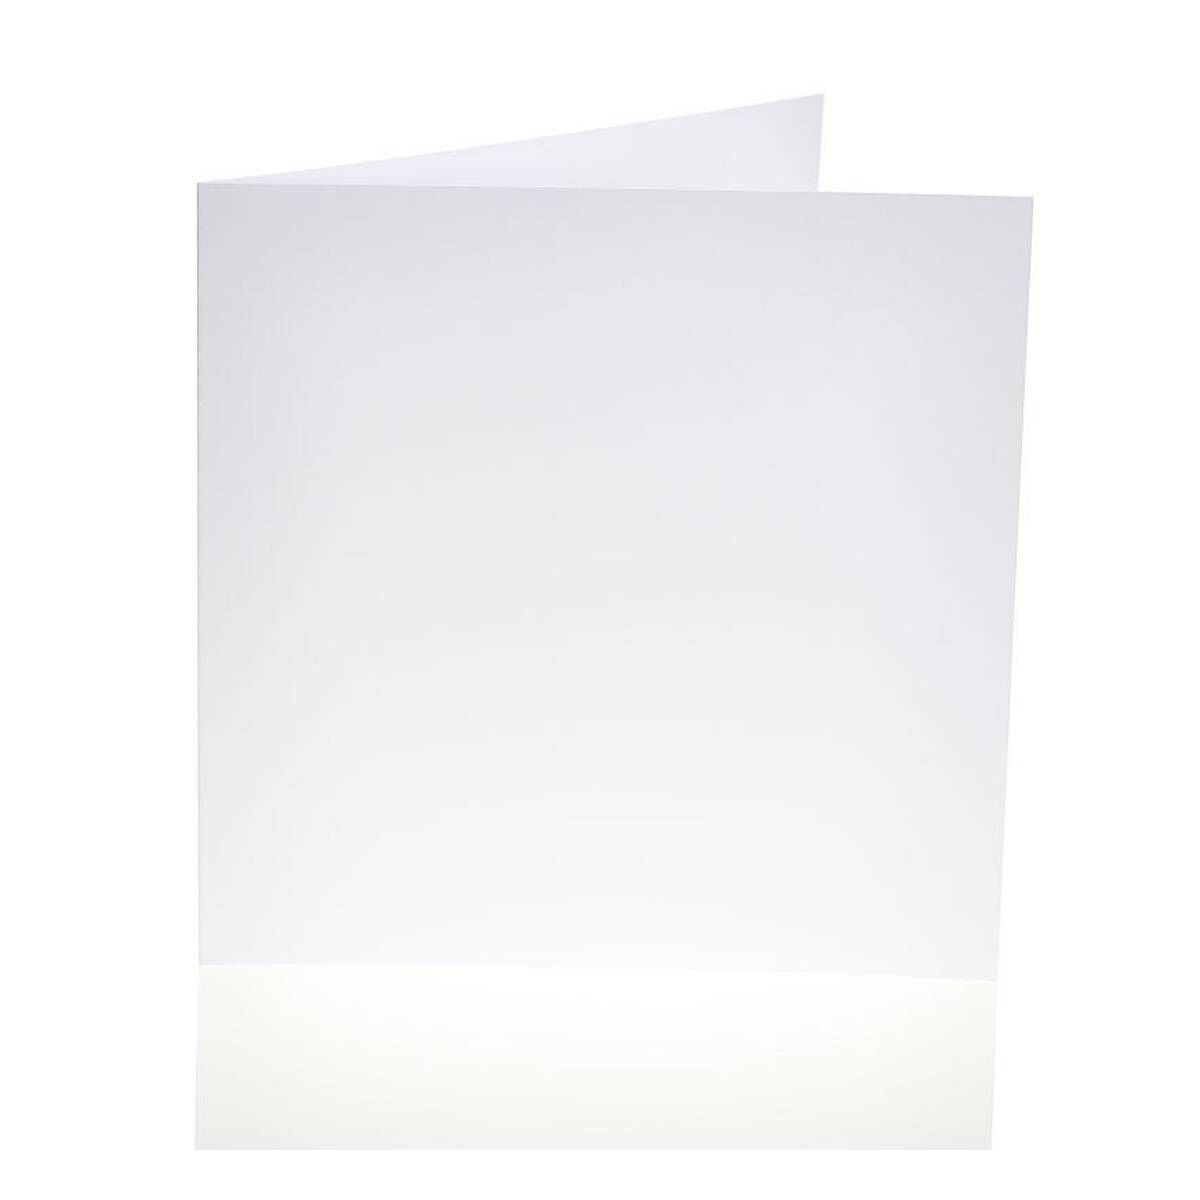 Invitation 3 Ace Crafts Pack of 20 8x8 Inch White Blank Cards and Envelopes Holiday Thank You Birthday and Celebrations Cardmaking Kit Cards Making for Greetings